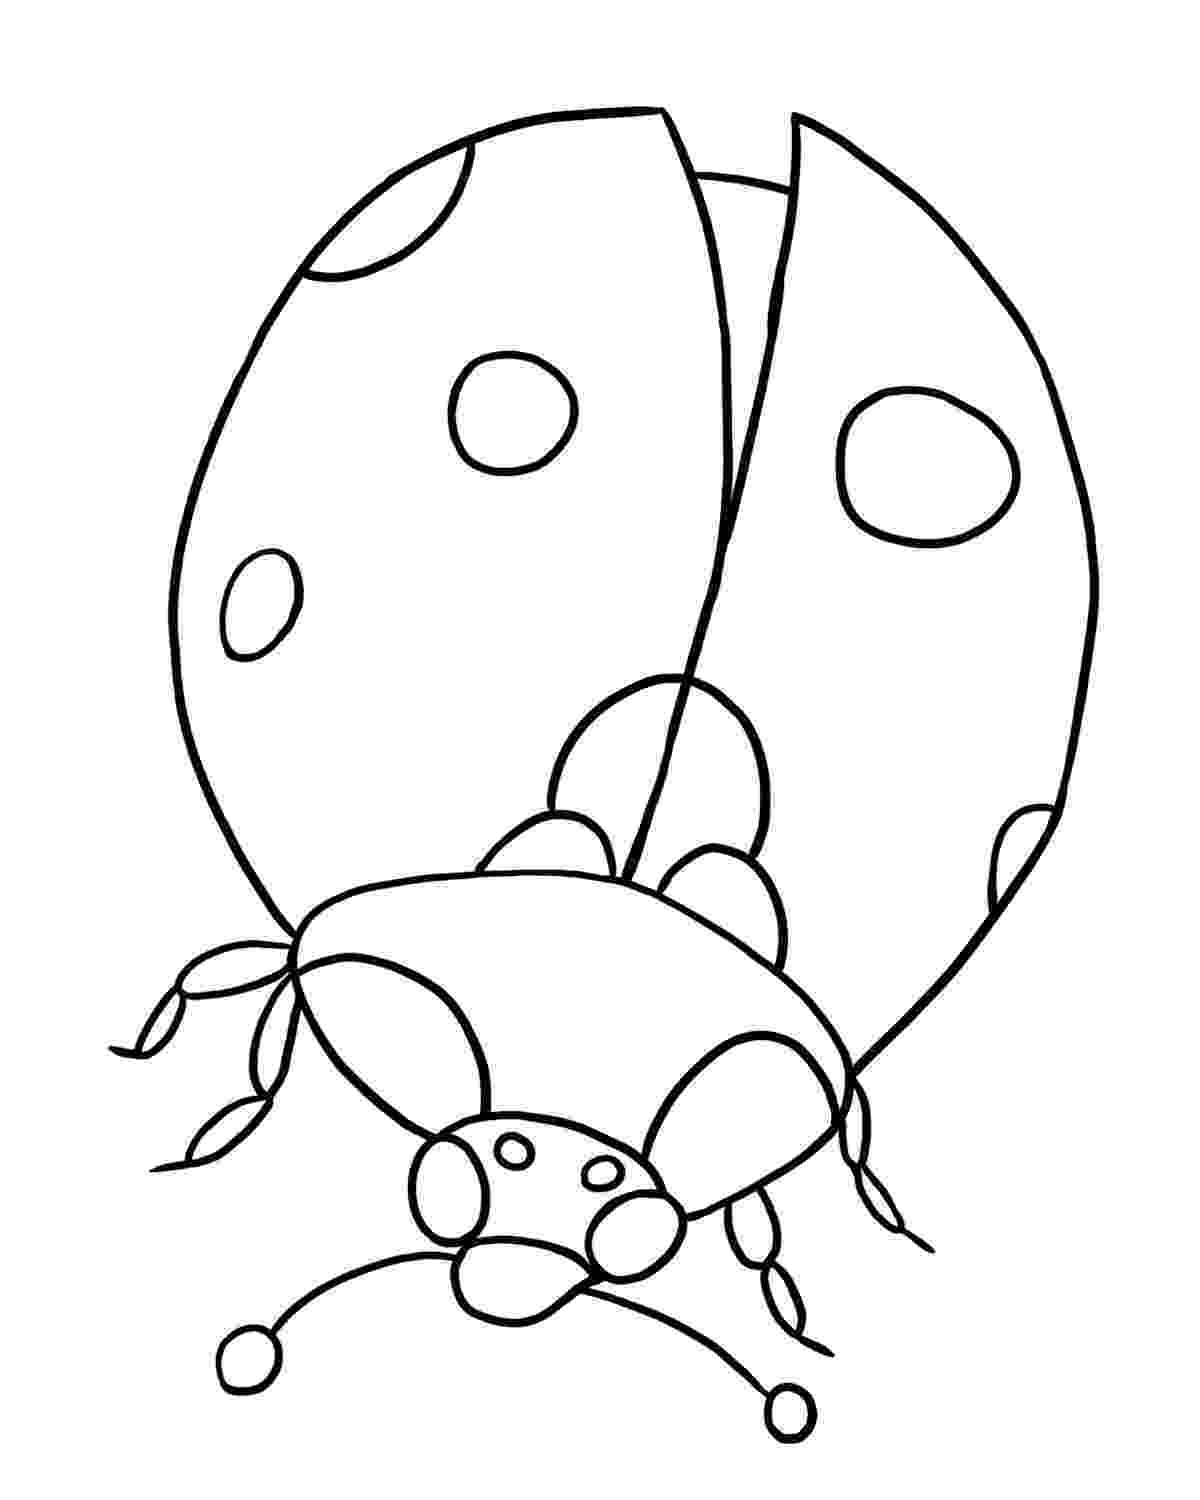 bugs colouring pages free printable bug coloring pages for kids colouring bugs pages 